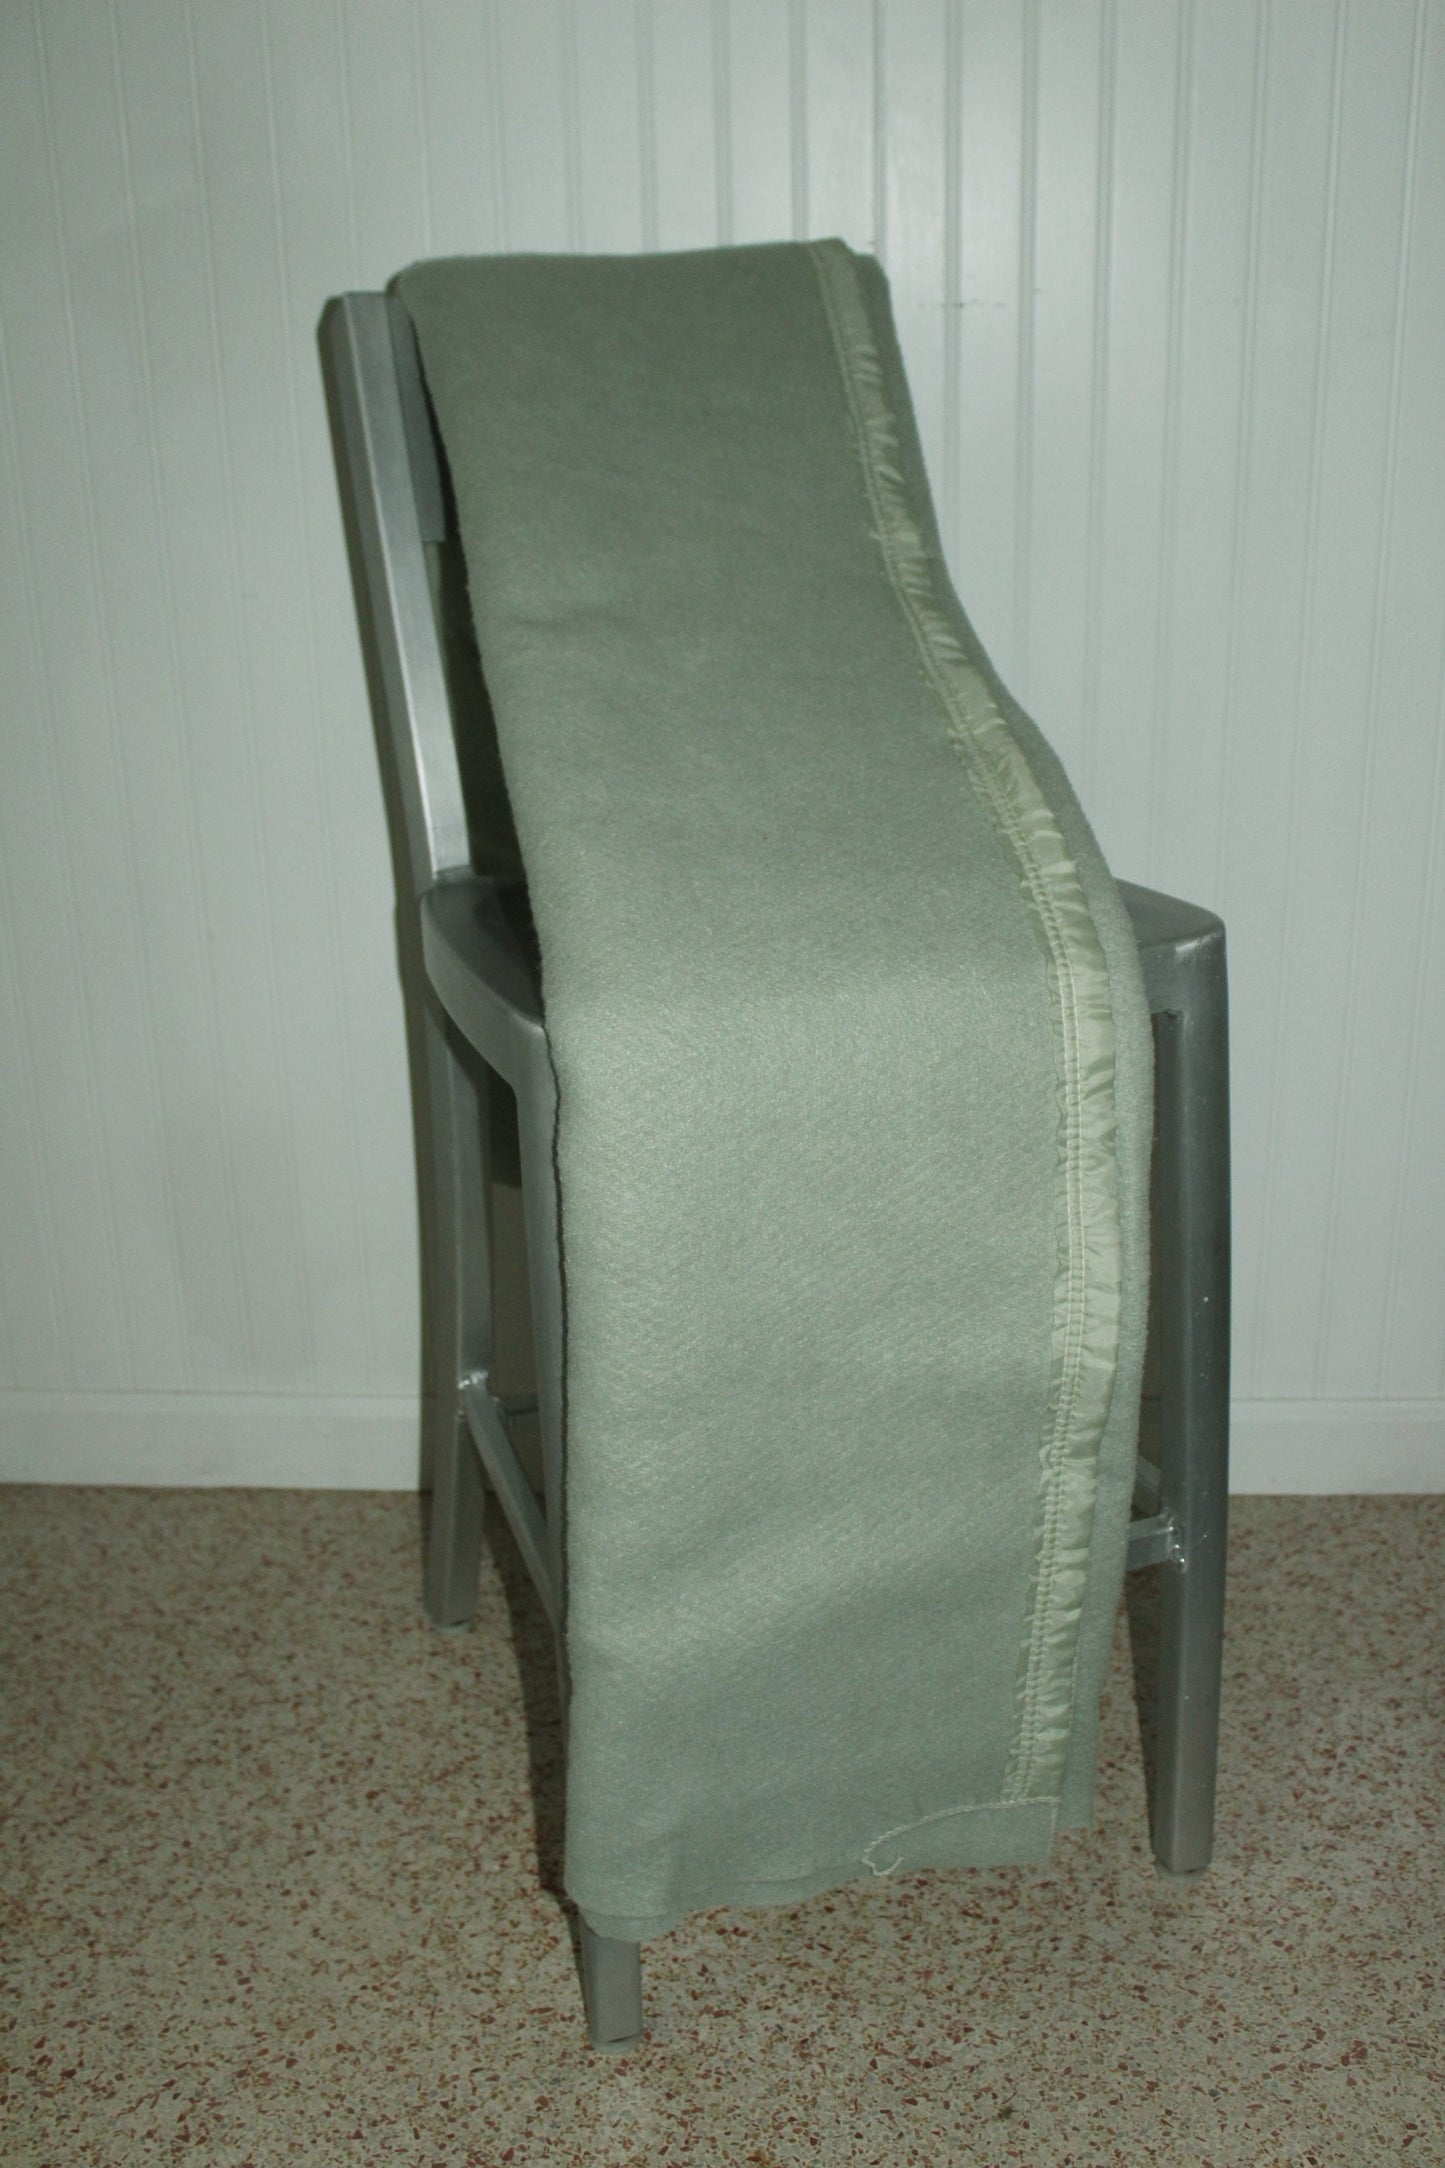 Polyester Sheet Blanket Mossy Green  69" X 90 all Year Use all season